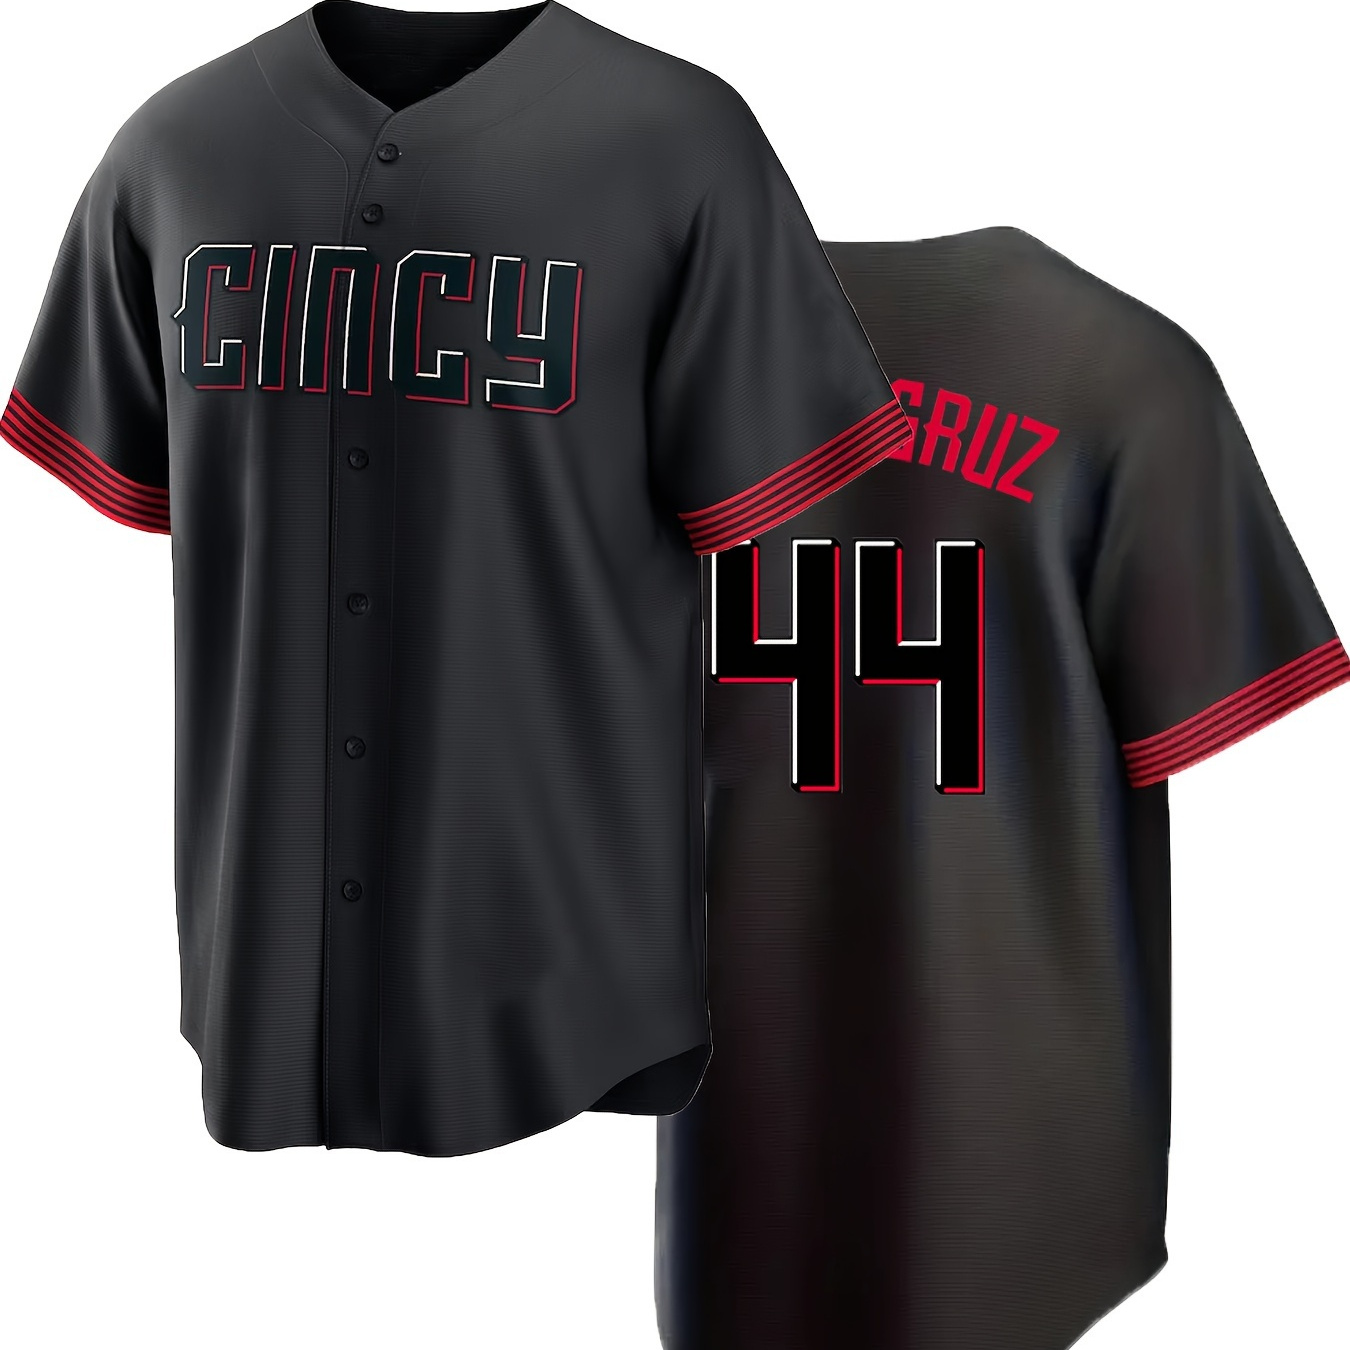 

Men's #44 Black City Edition Baseball Jersey, Classic Retro Letter Embroidery Design Breathable Short Sleeve T-shirt For Training Competition